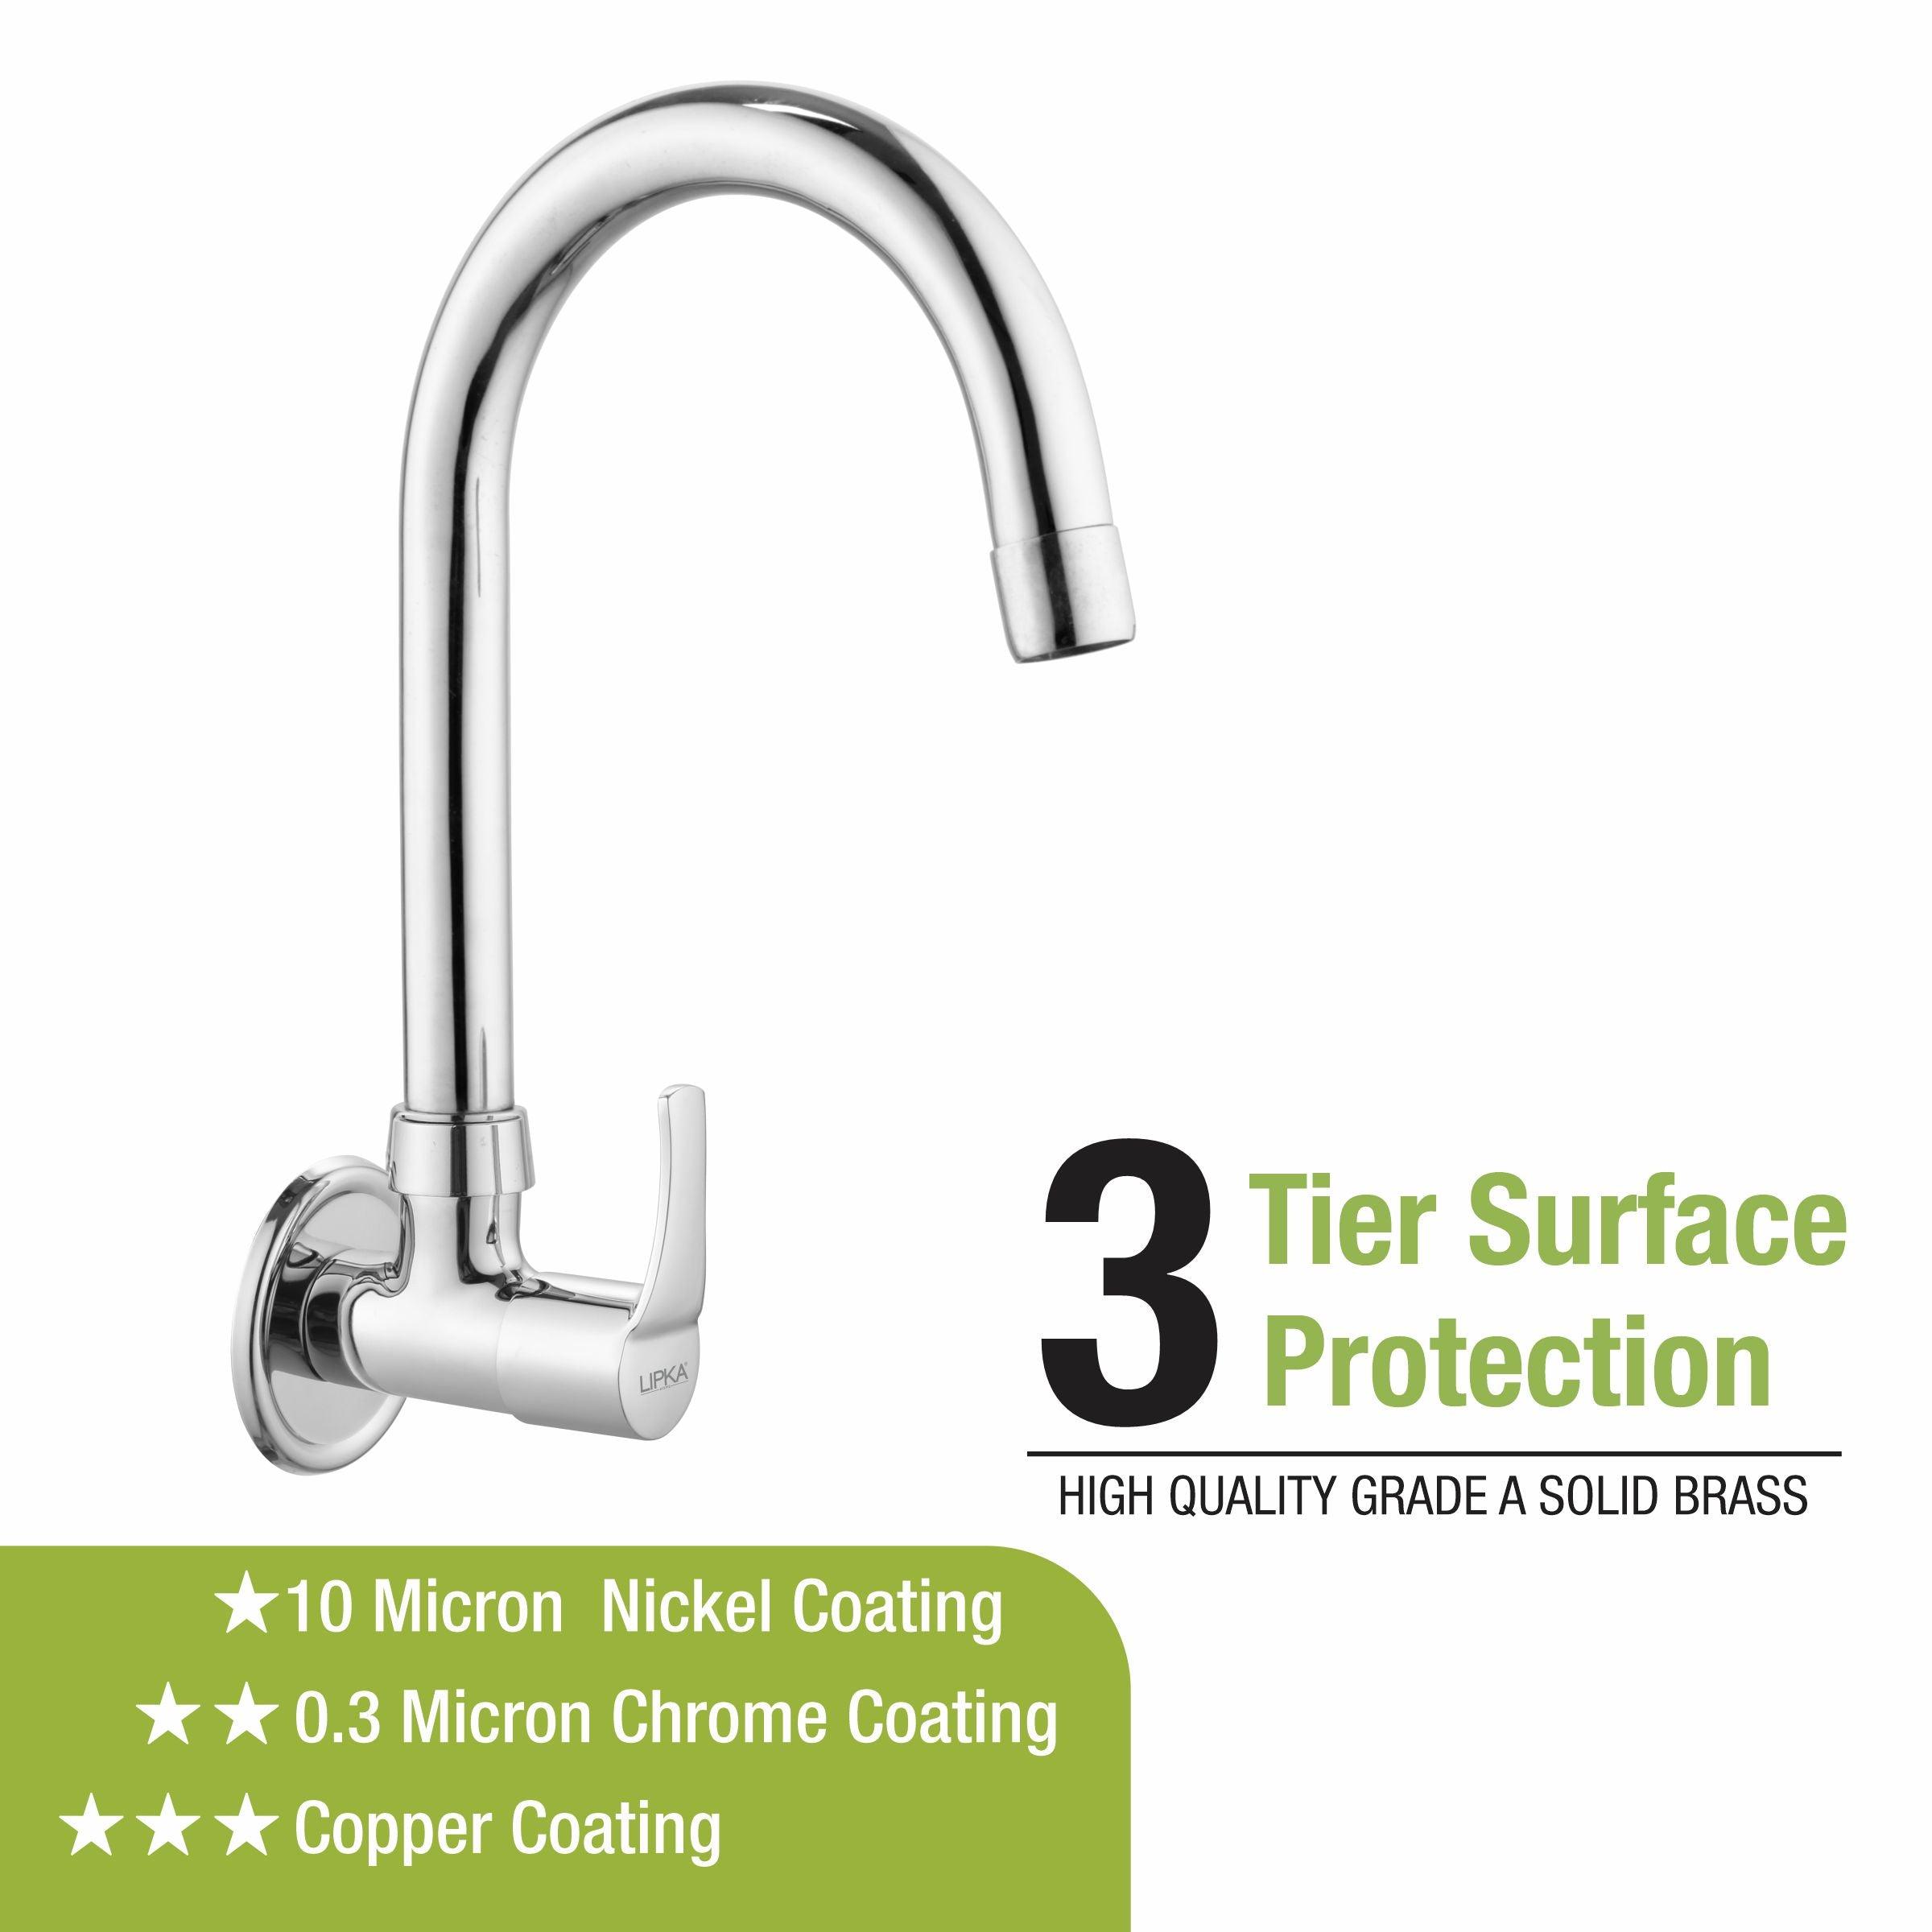 Coral Sink Tap Brass Faucet with Round Swivel Spout (15 Inches) - LIPKA - Lipka Home